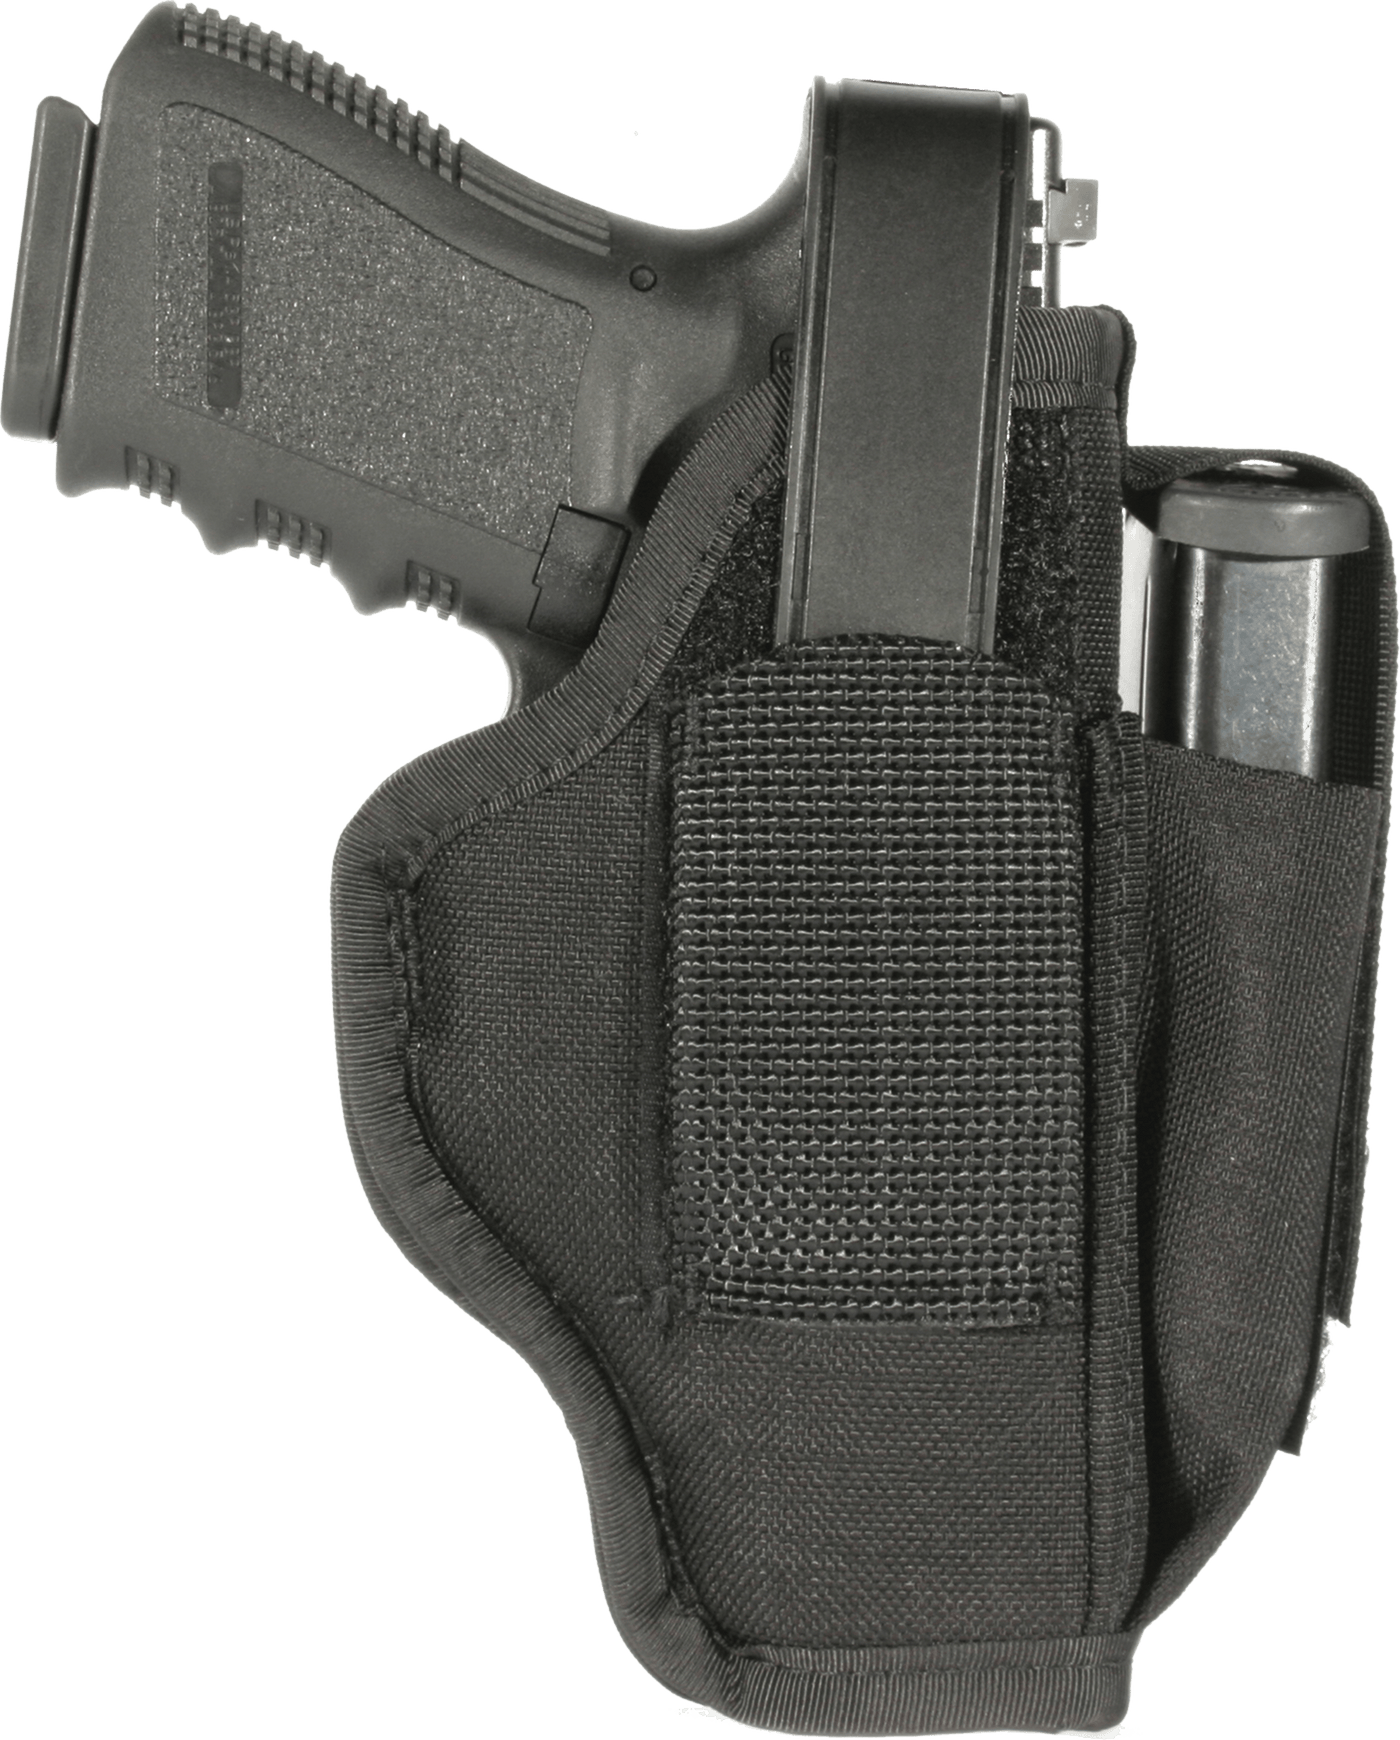 Blackhawk Blackhawk Ambidextrous Holster - W/mag Pouch #06 Nylon Black Holsters And Related Items